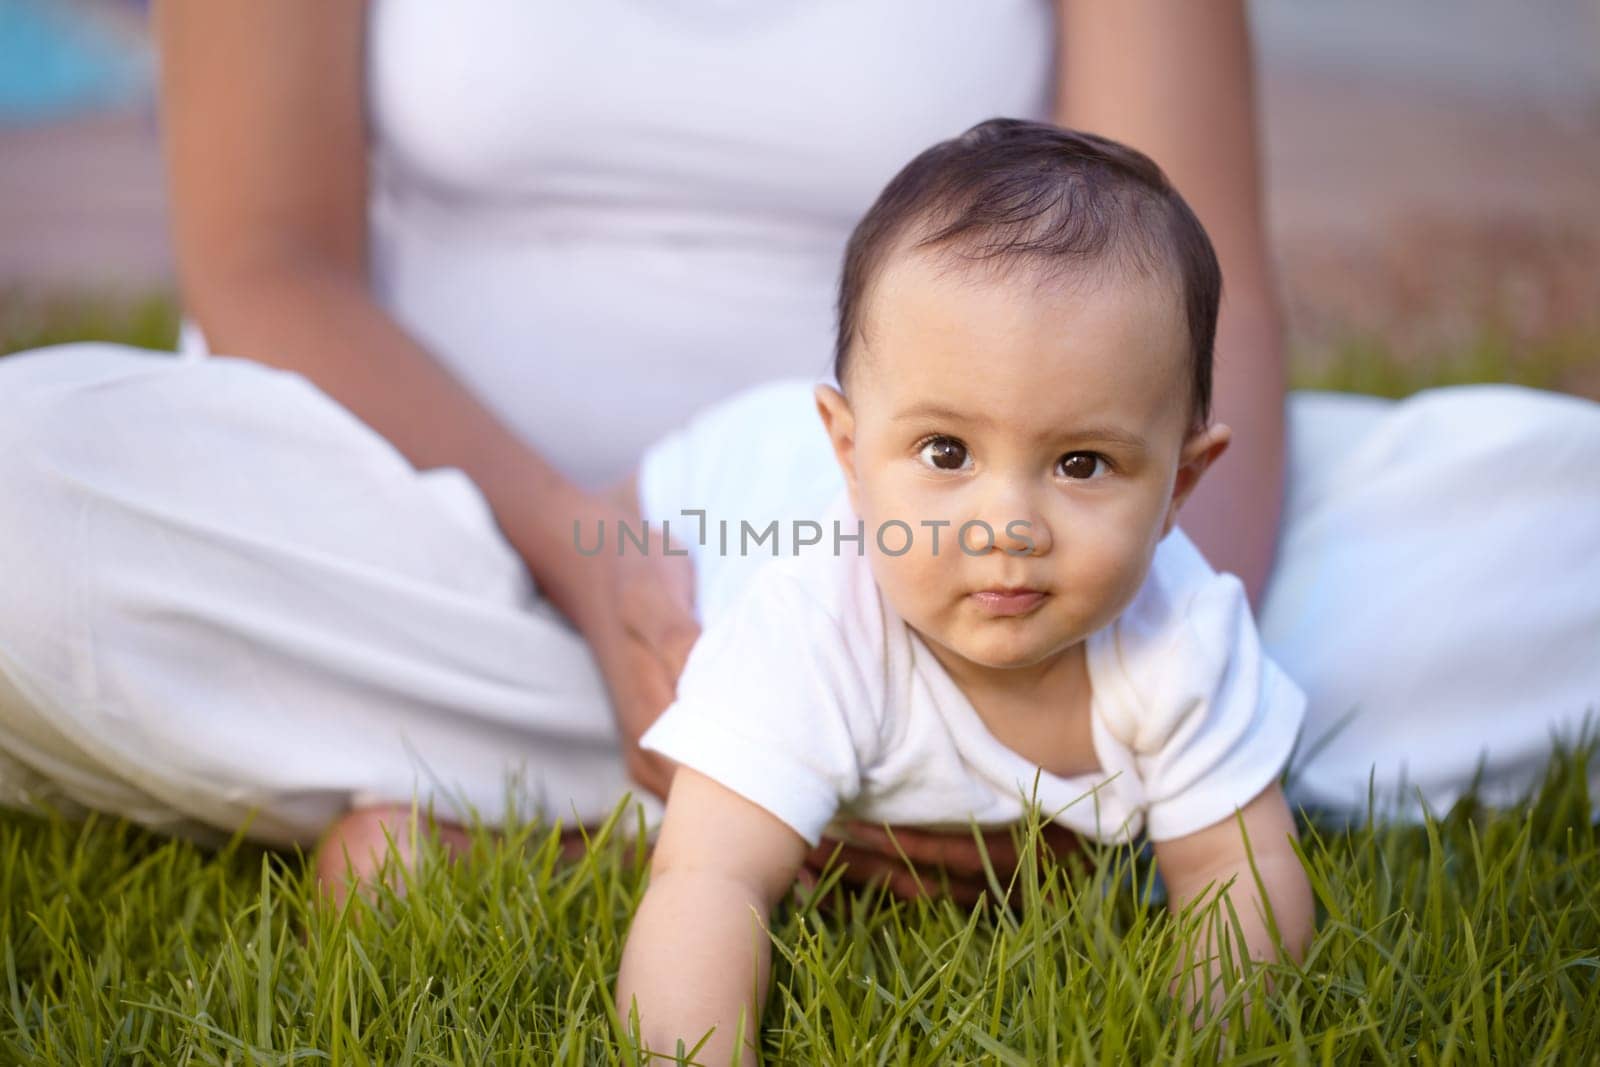 Portrait, crawling and baby with a mother in the park together during summer for bonding, care and playing. Kids, face and a curious infant child with mama on grass, garden and in nature outdoor.